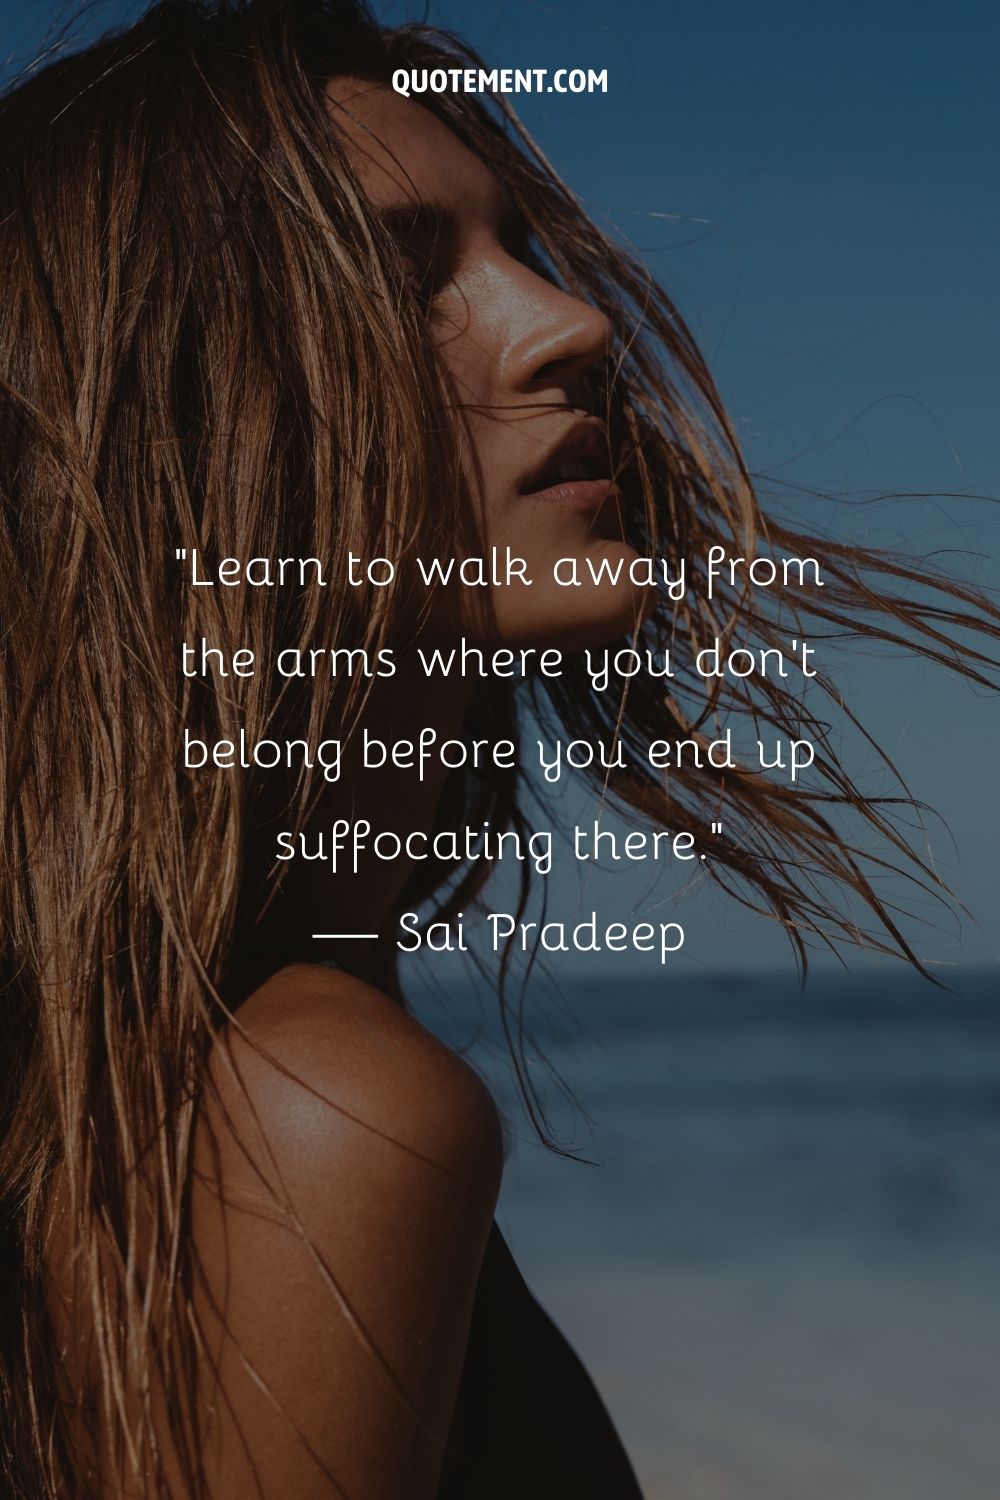 Woman on the beach looking beautiful representing woman walking away quote